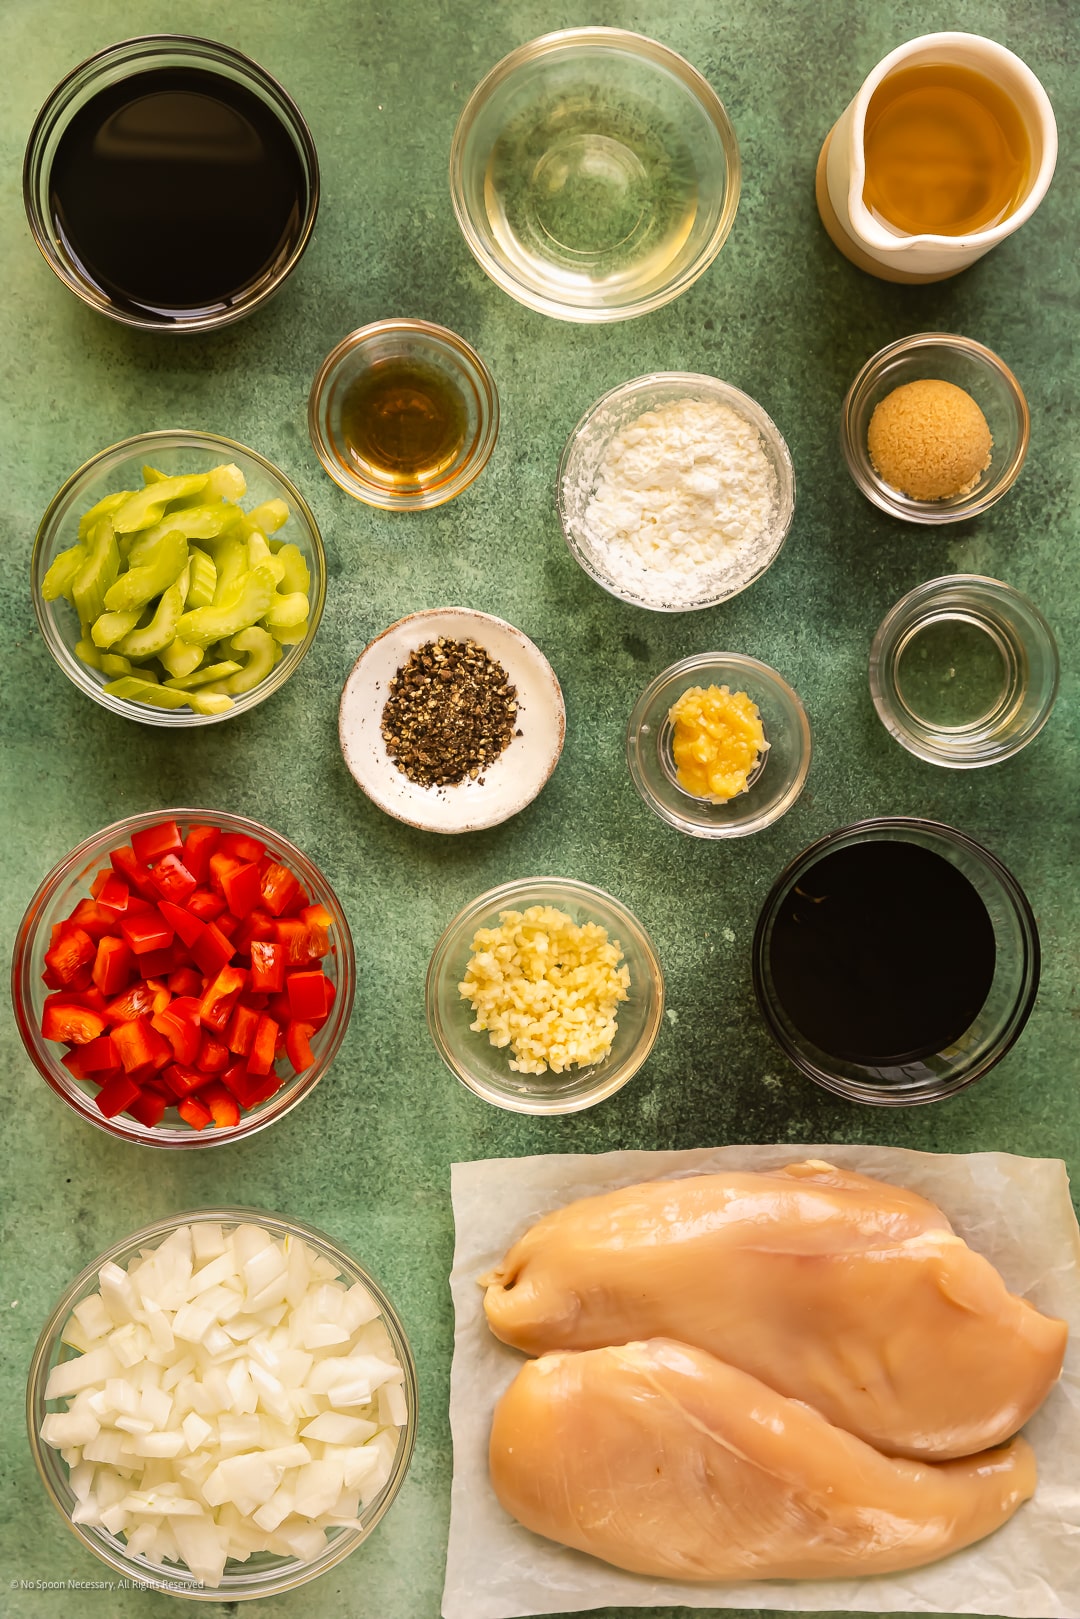 Overhead photo of all the ingredients needed to make crispy black pepper chicken neatly arranged on a kitchen counter.